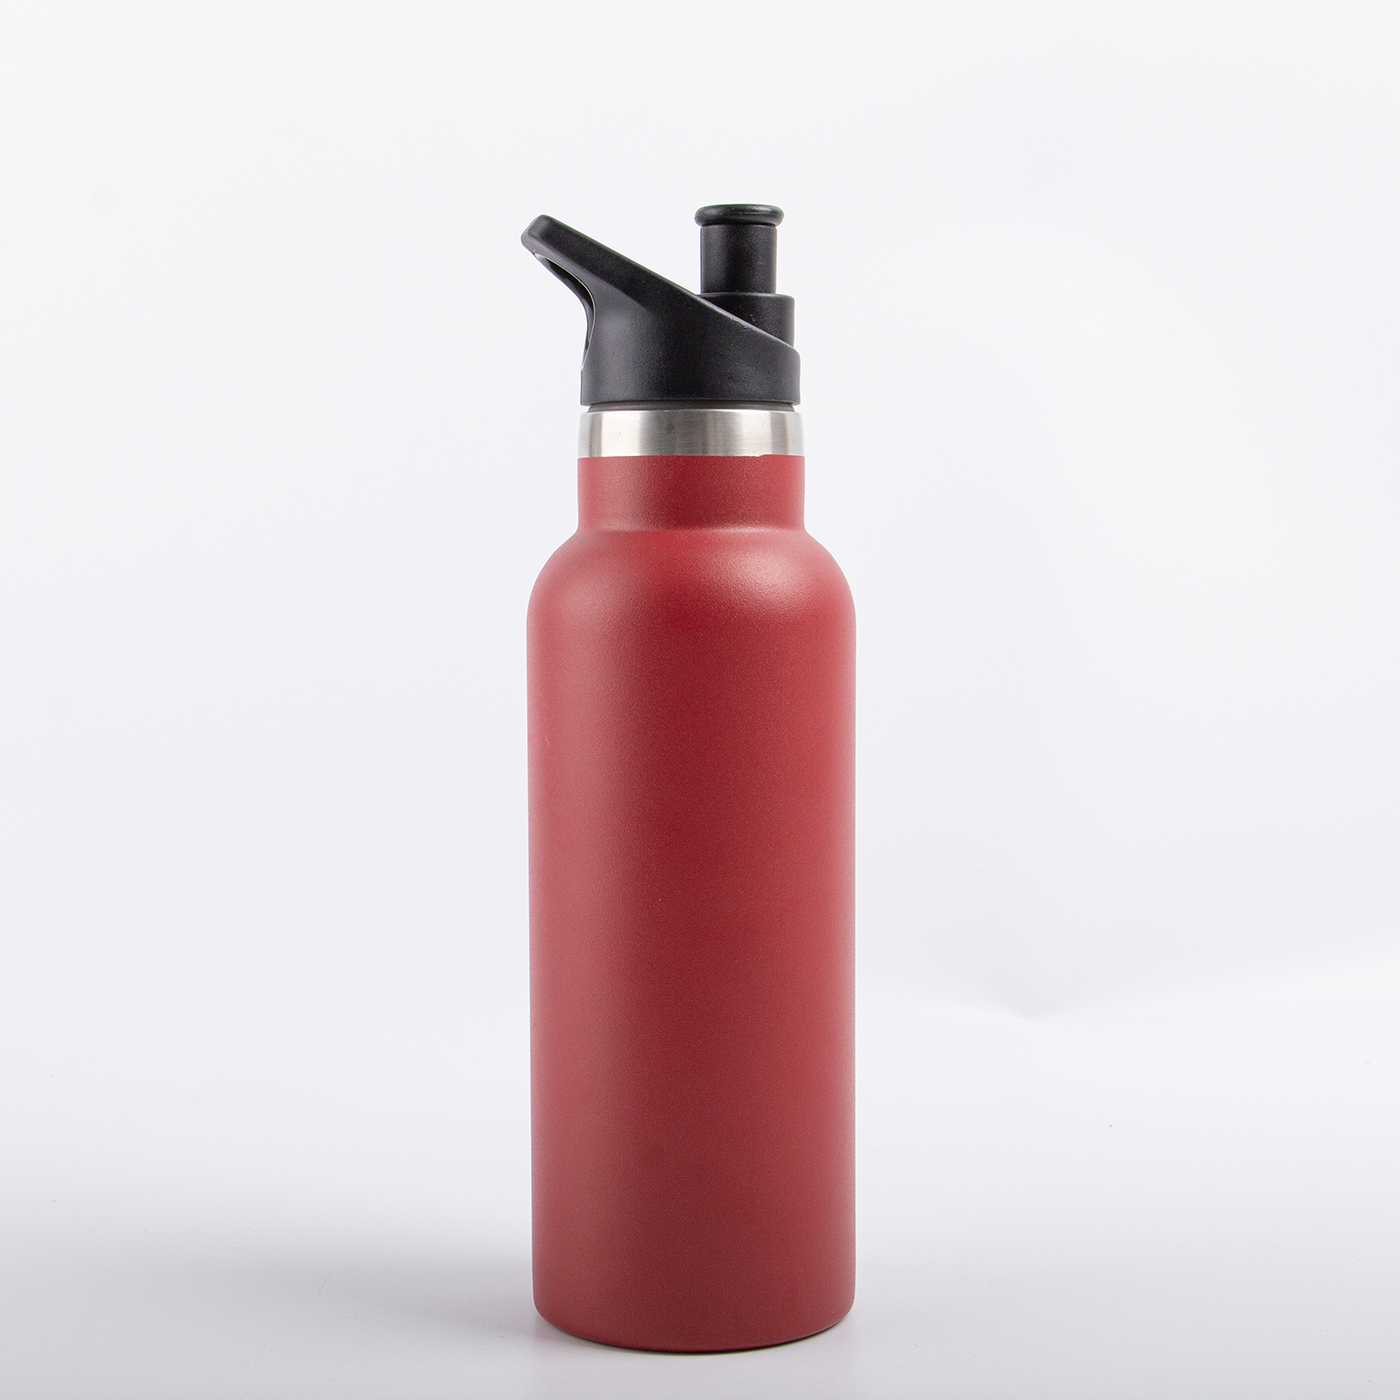 16 oz. Insulated Sport Water Bottle With Straw Lid3